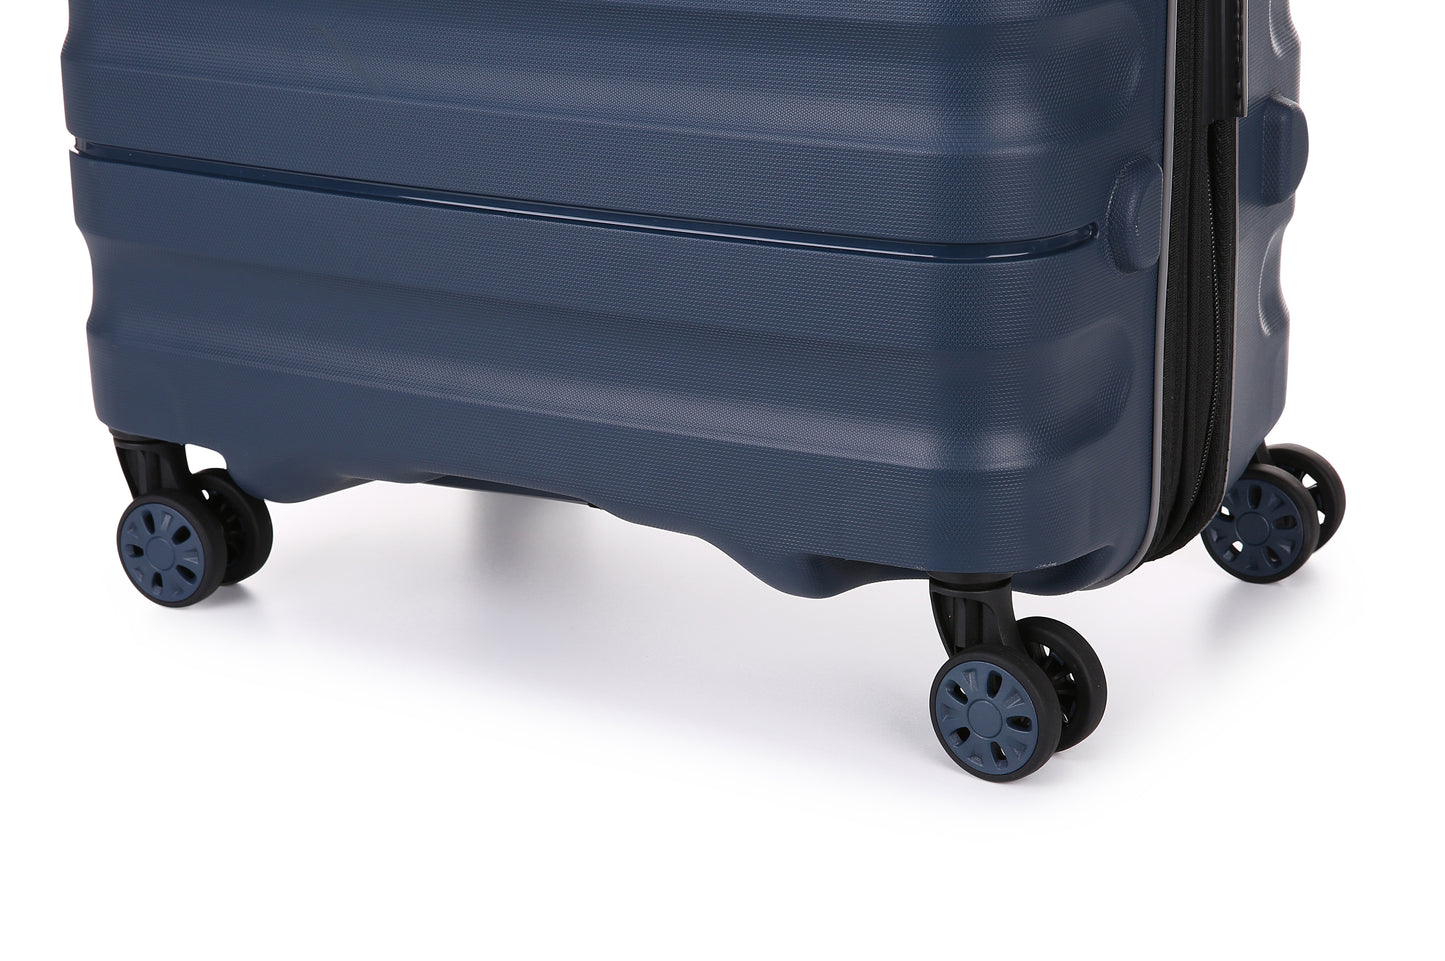 Antler - Lincoln Small 56cm Hardside 4 Wheel Suitcase - Navy - rainbowbags